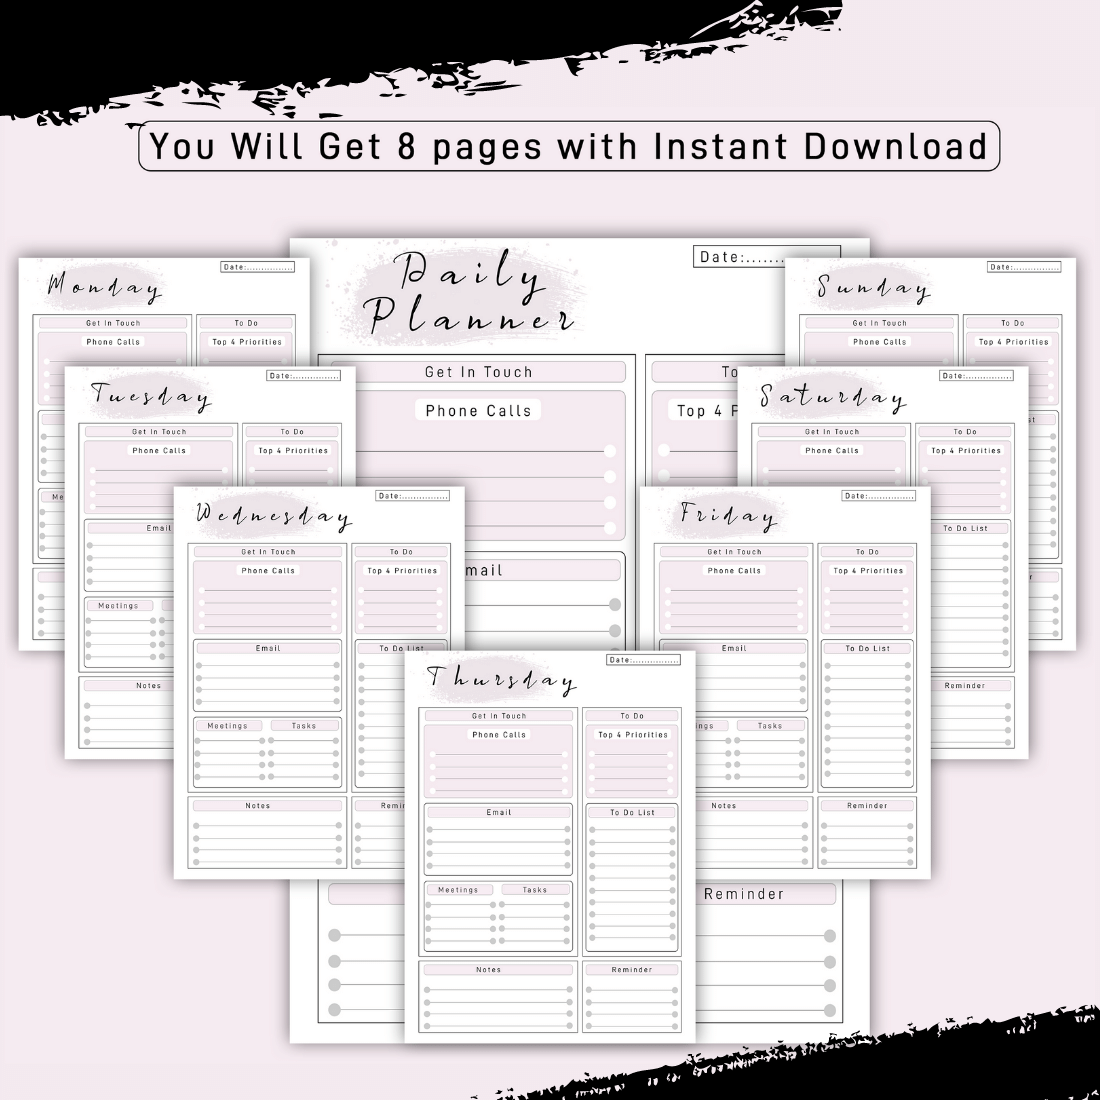 Efficient Daily Printable Planner created by MrMdee.